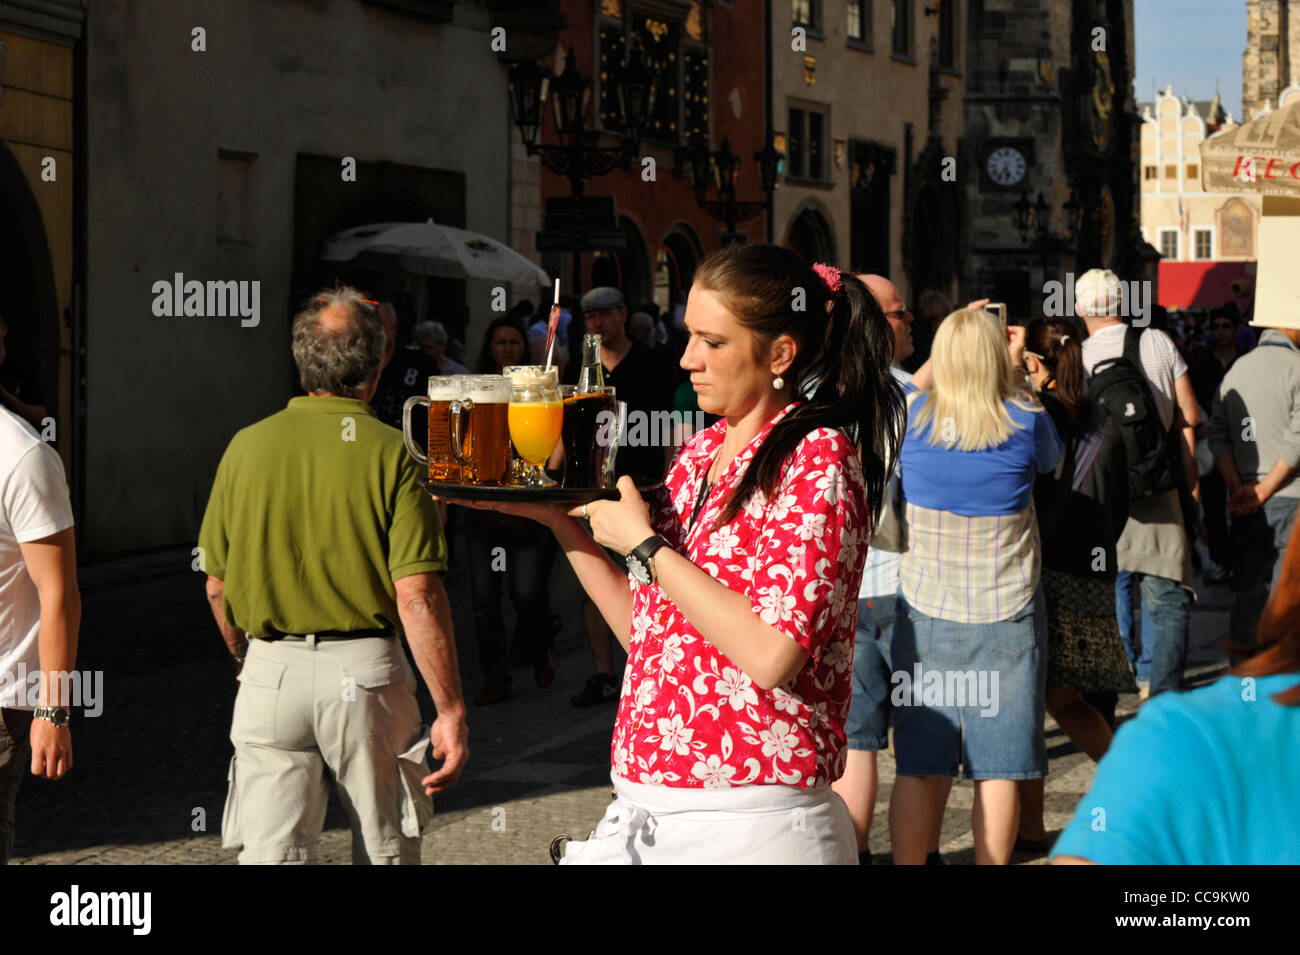 Waitress serving drinks in the Old town square Prague Czech Republic Stock Photo